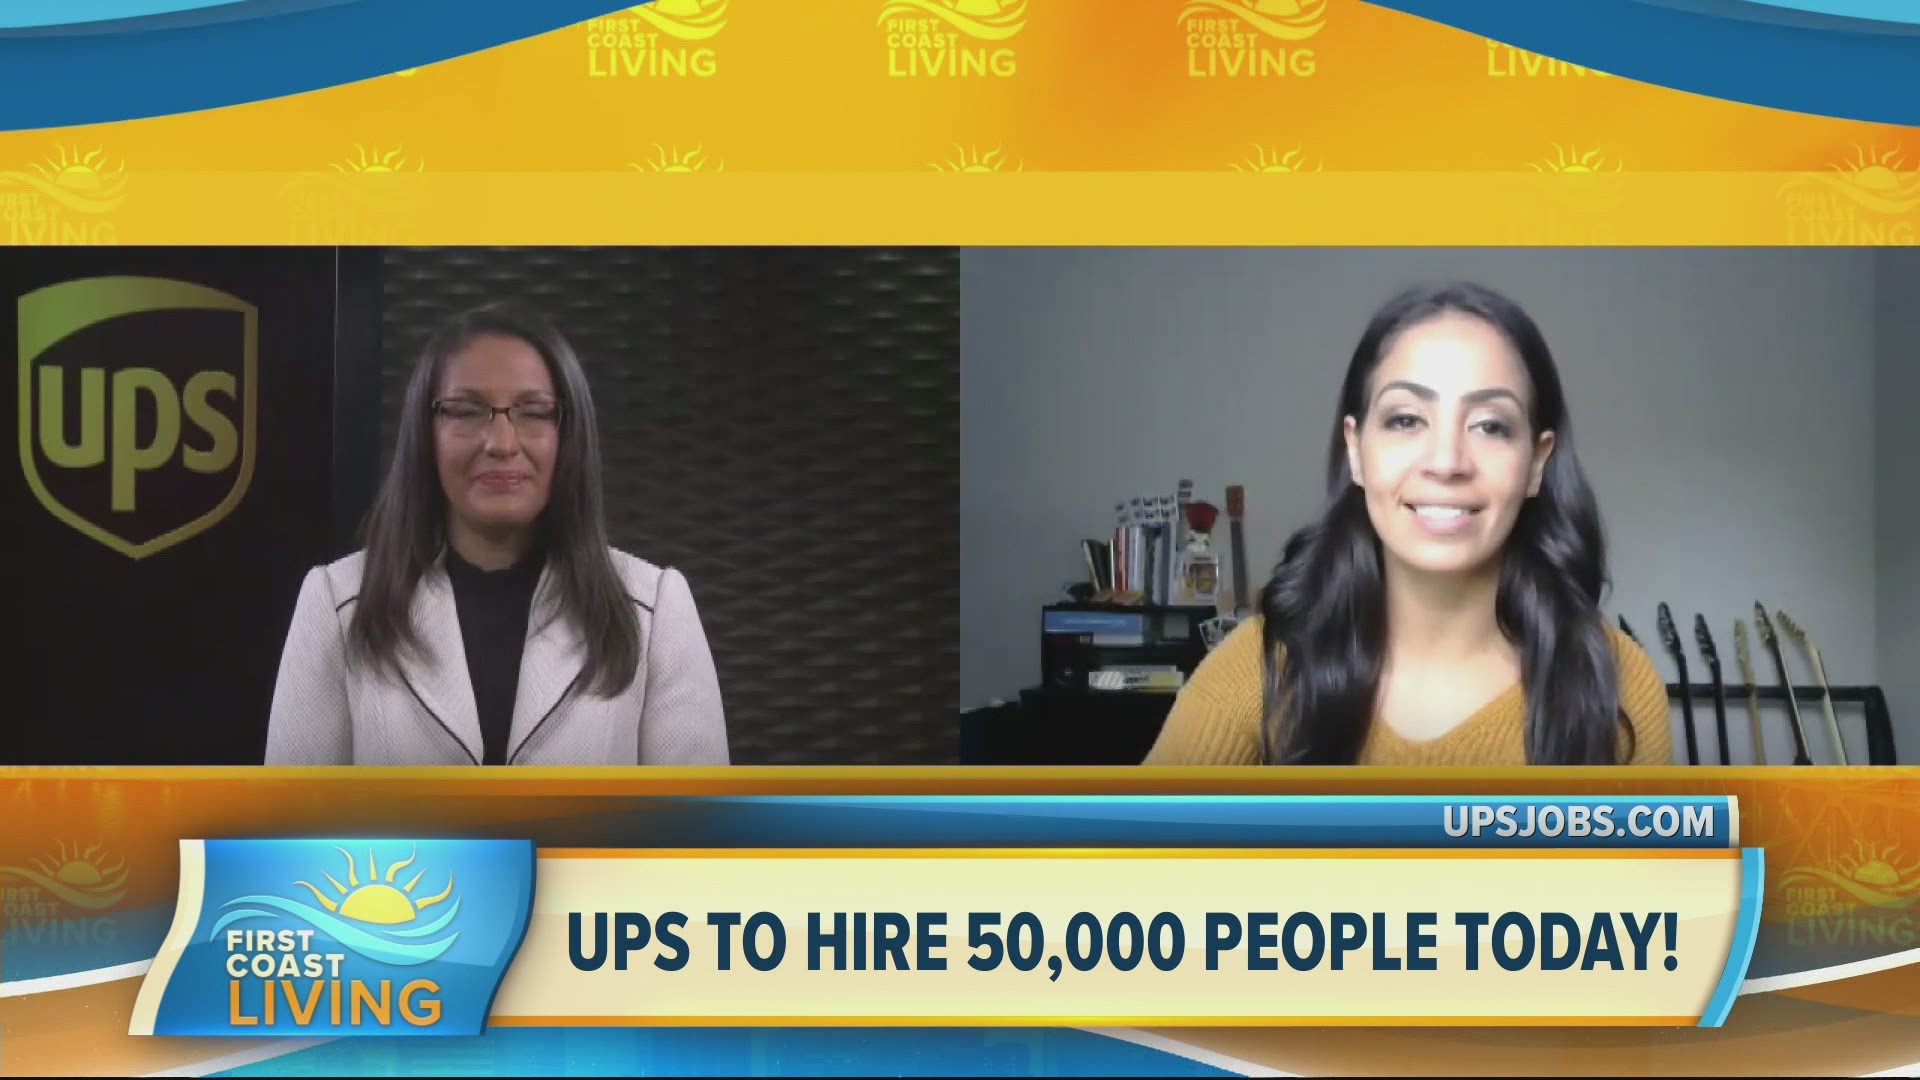 Brown Friday is a major hiring event for UPS!